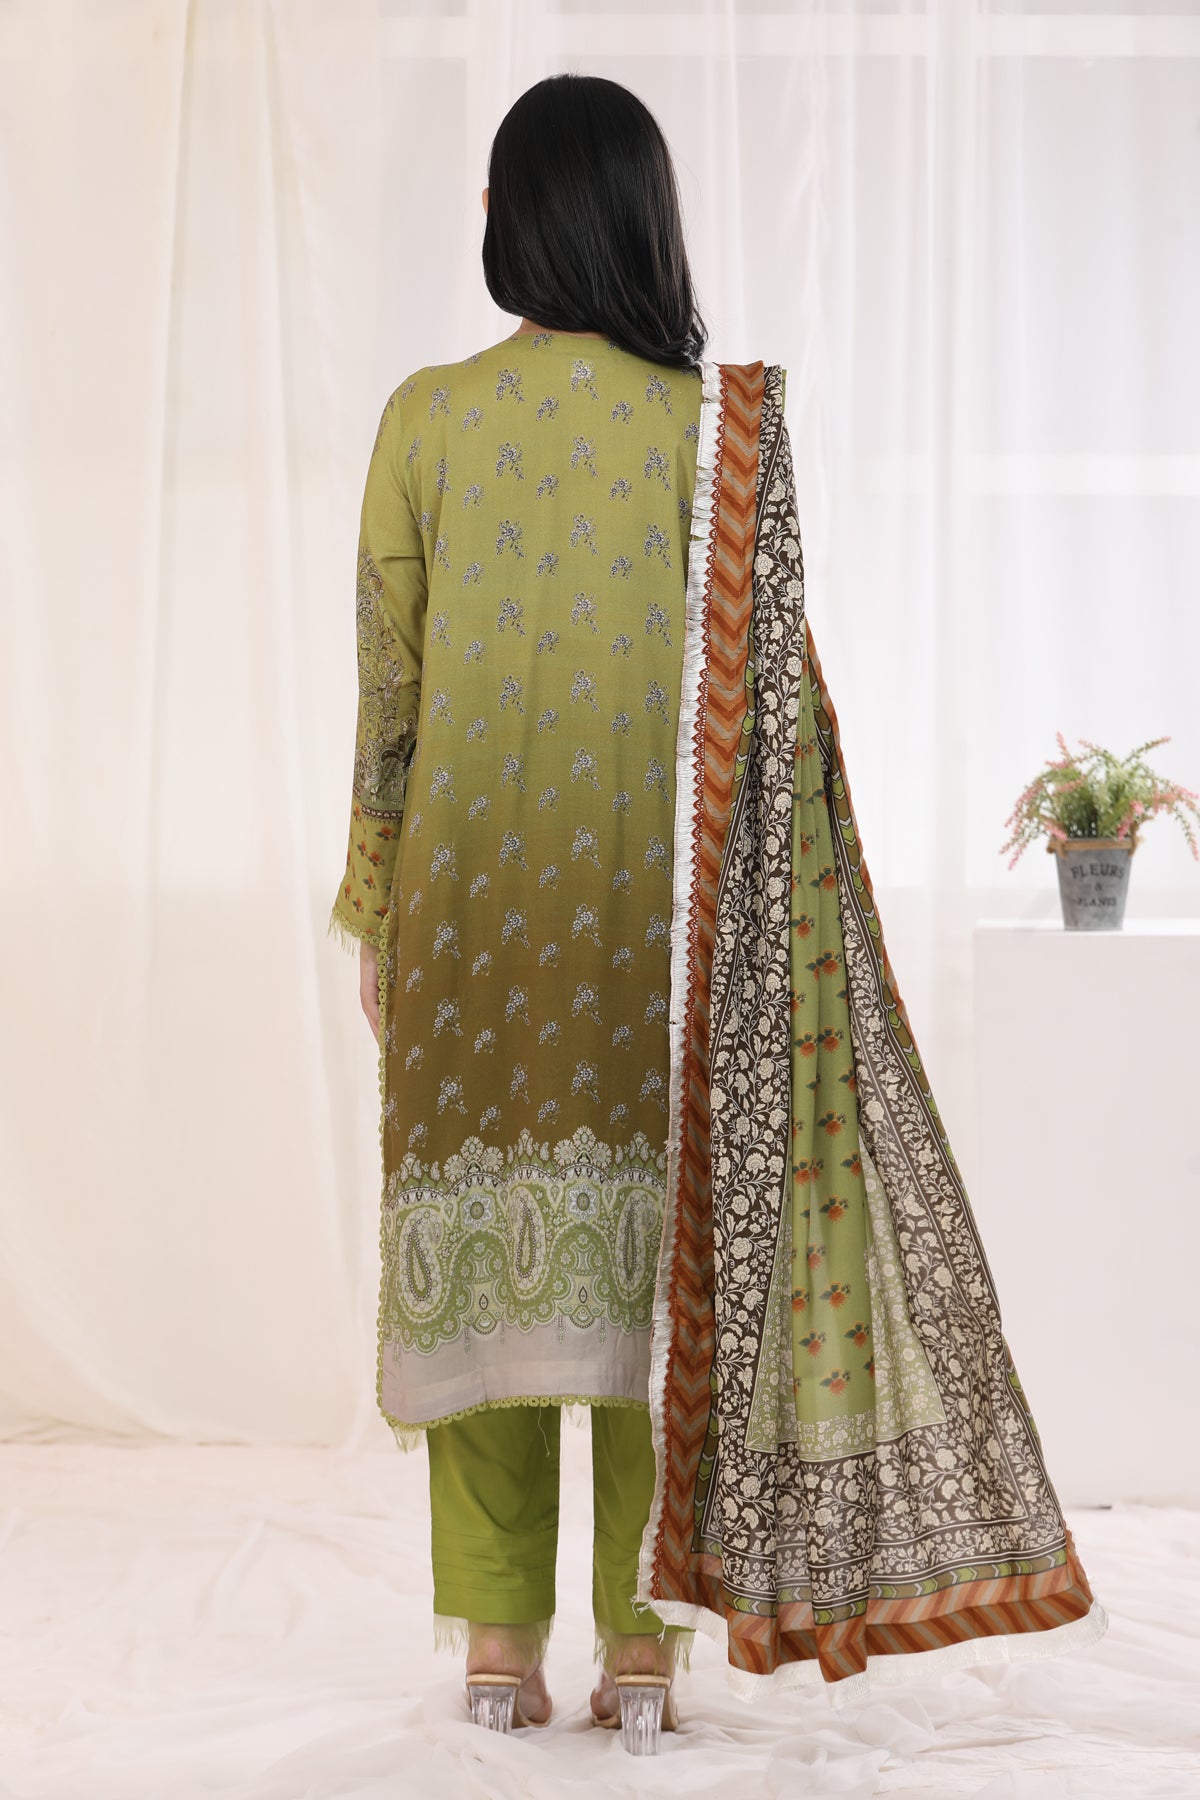 Olive Green Linen Suit - Sobia Nazir Winter Collection